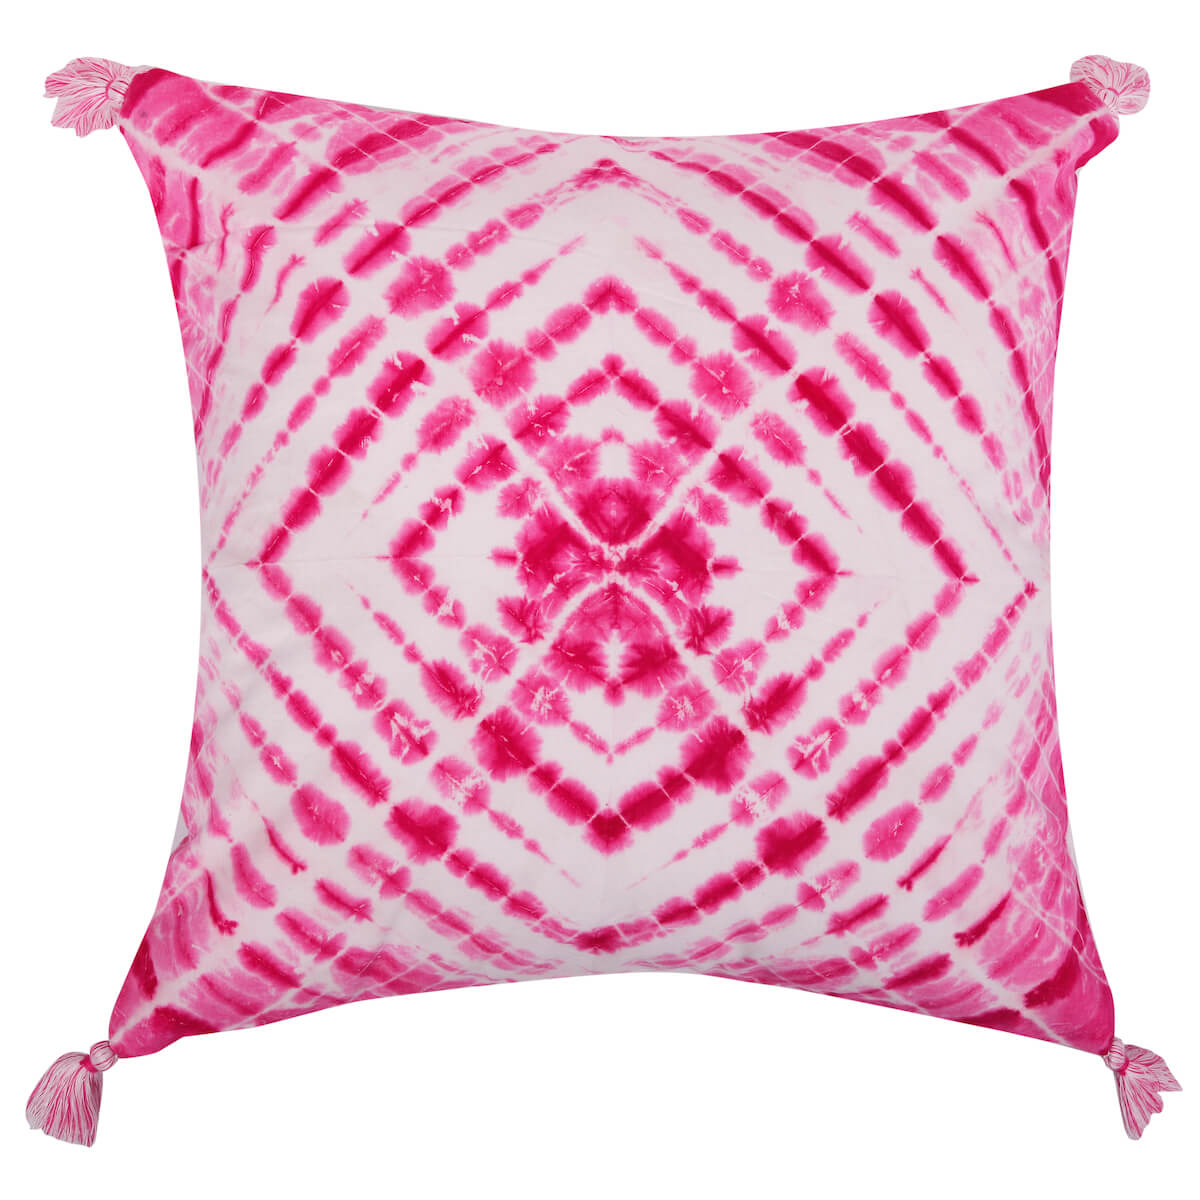 Handcrafted Tie Dye Pattern Pink Colour Cotton Cushion Cover - 16"x16" Size